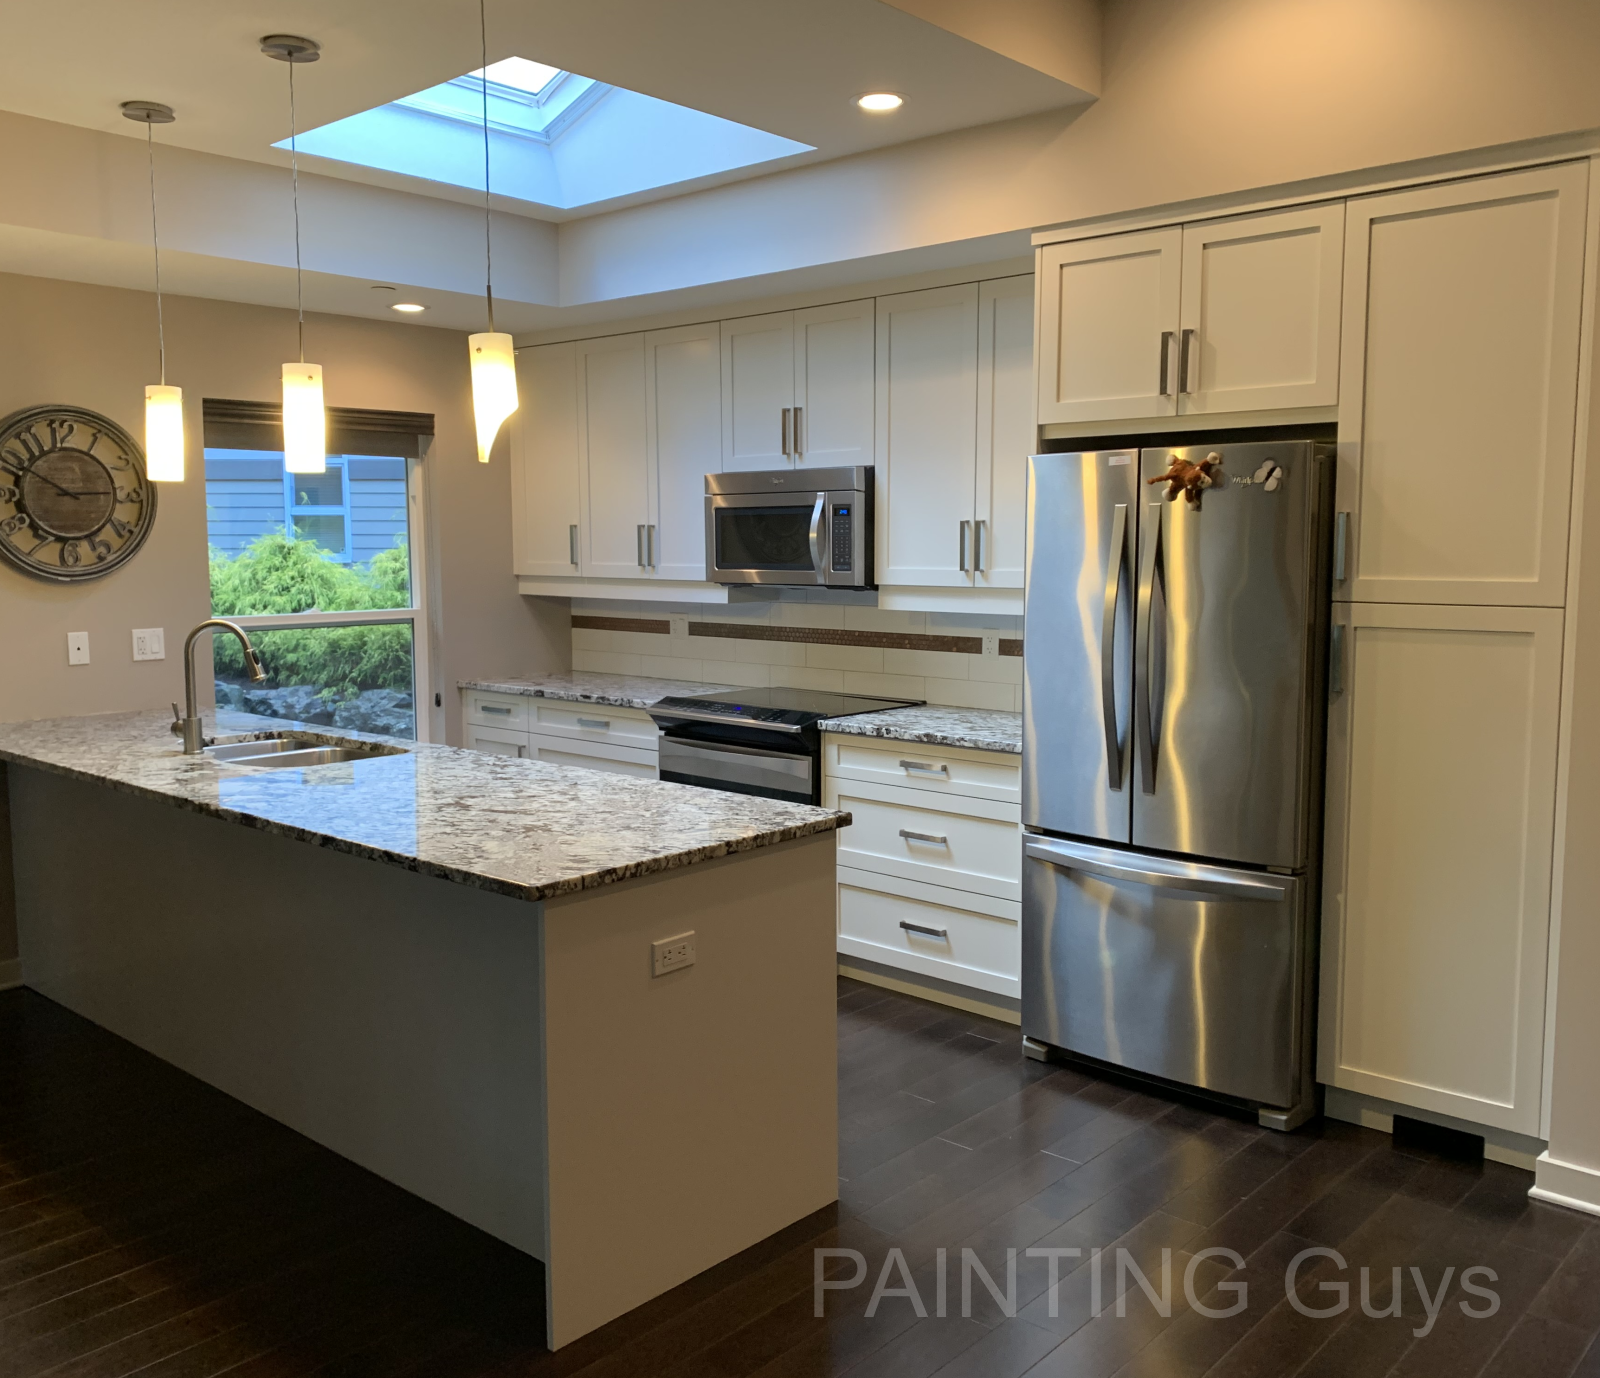 Classic Gray, kitchen cabinet painting: PAINTING Guys